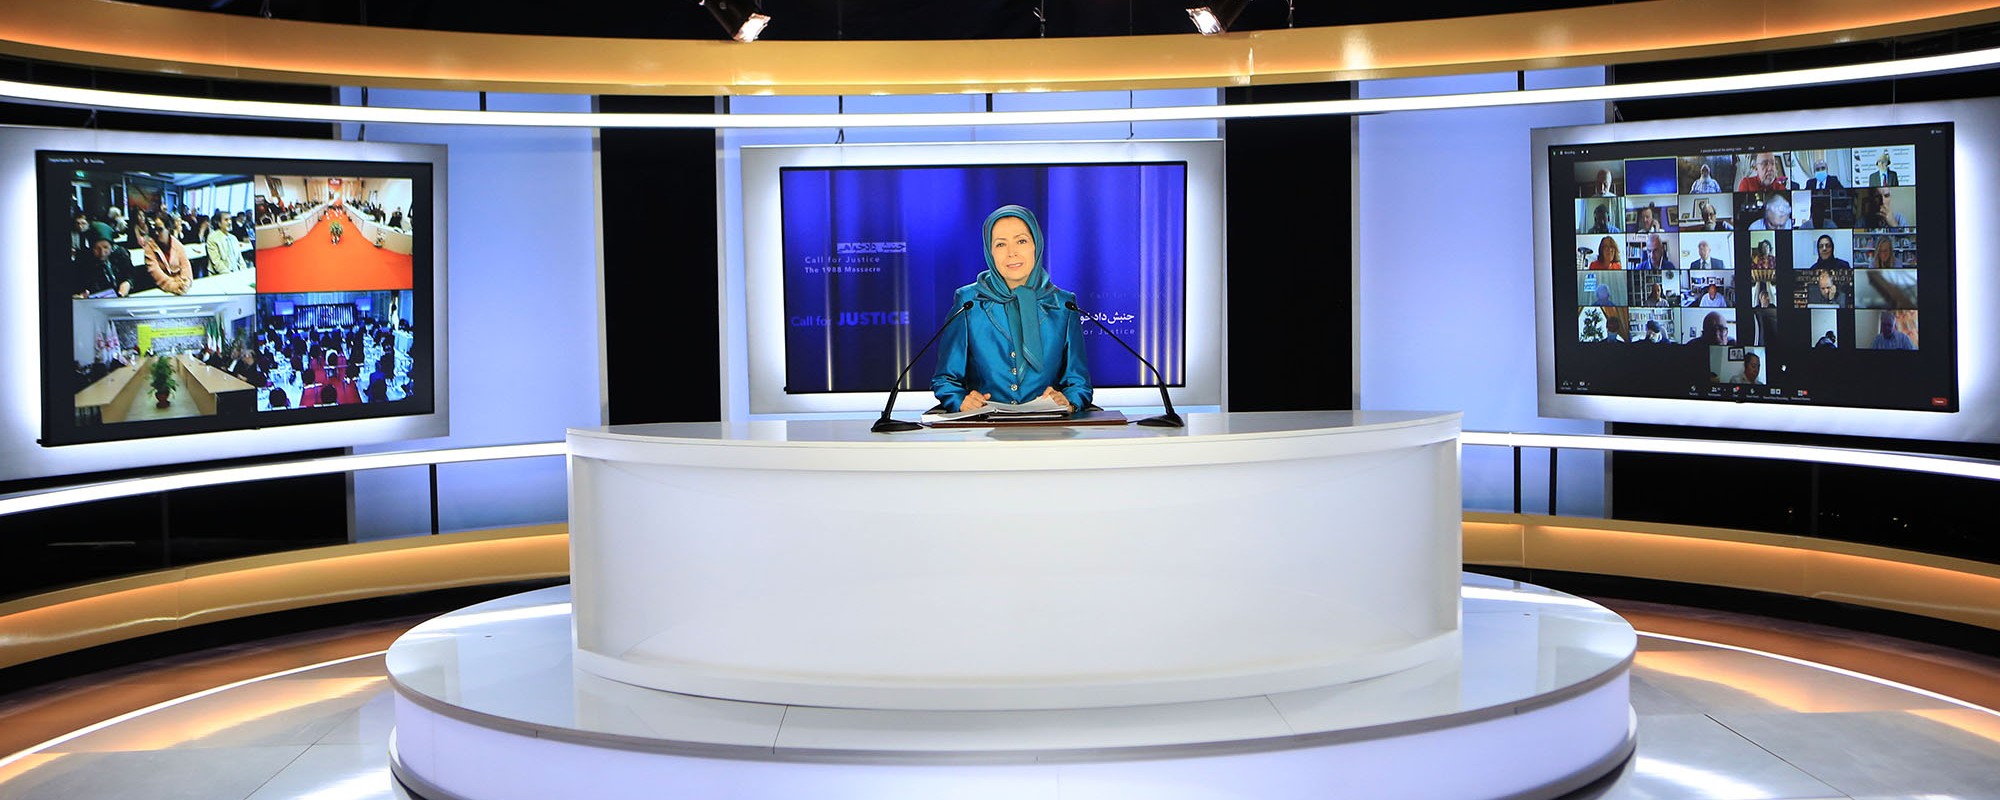 Maryam Rajavi: The Call-for-Justice movement is synonymous with resistance to overthrow the clerical regime for freedom